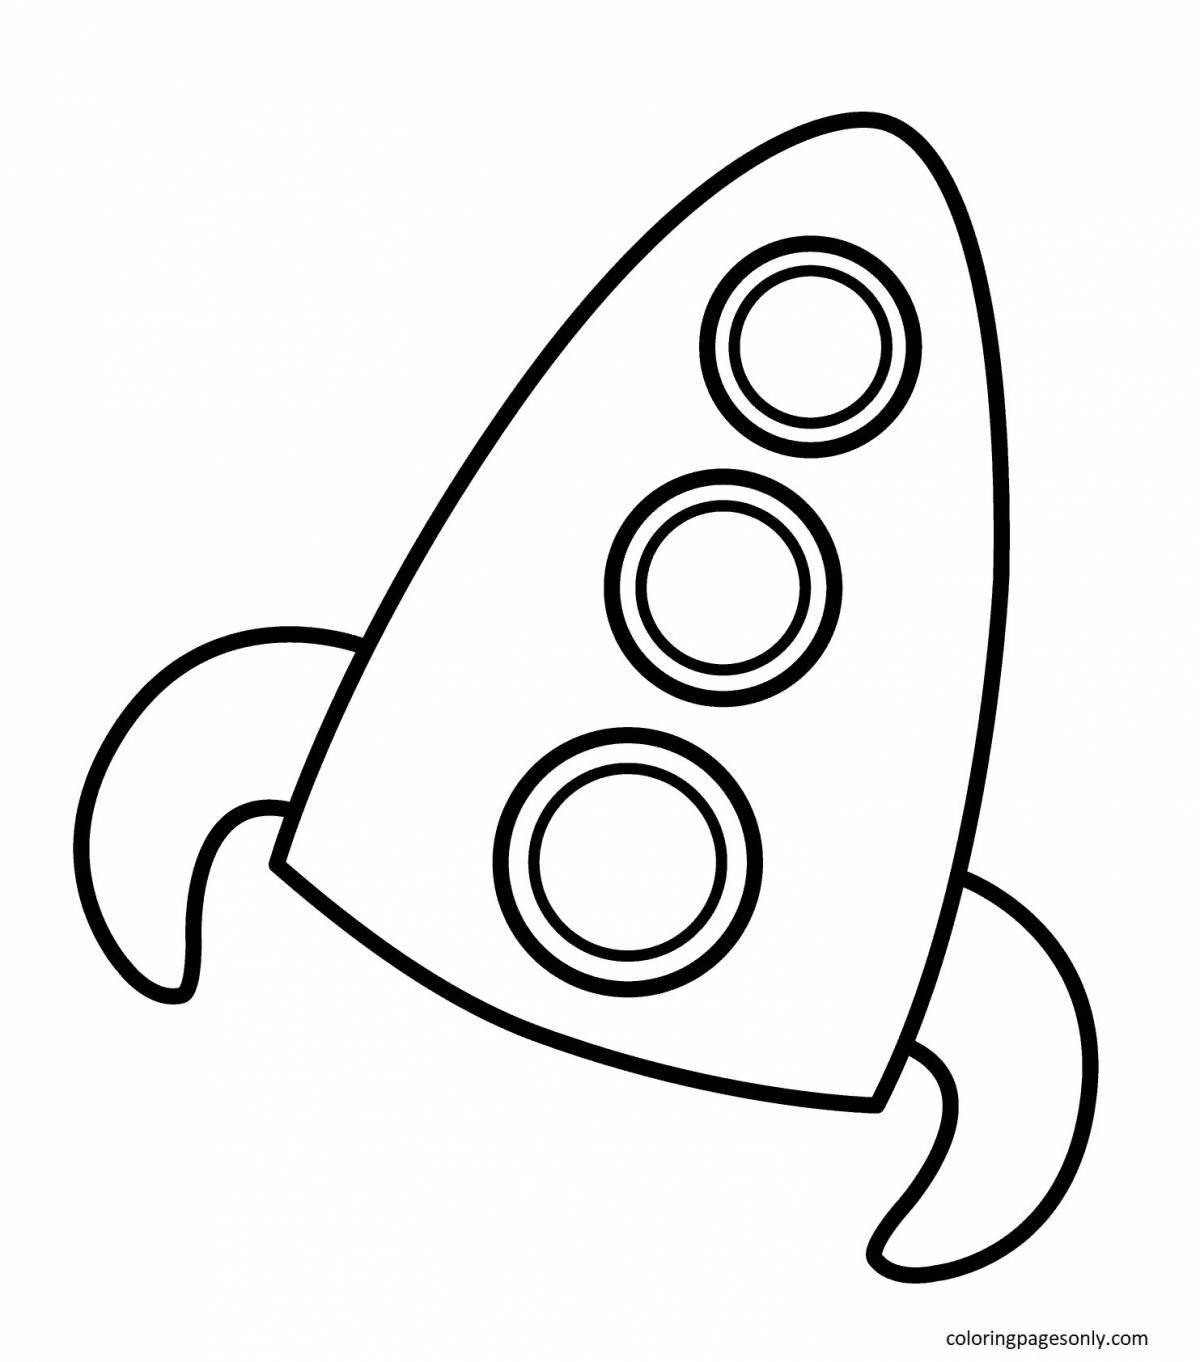 Playful rocket coloring page for kids